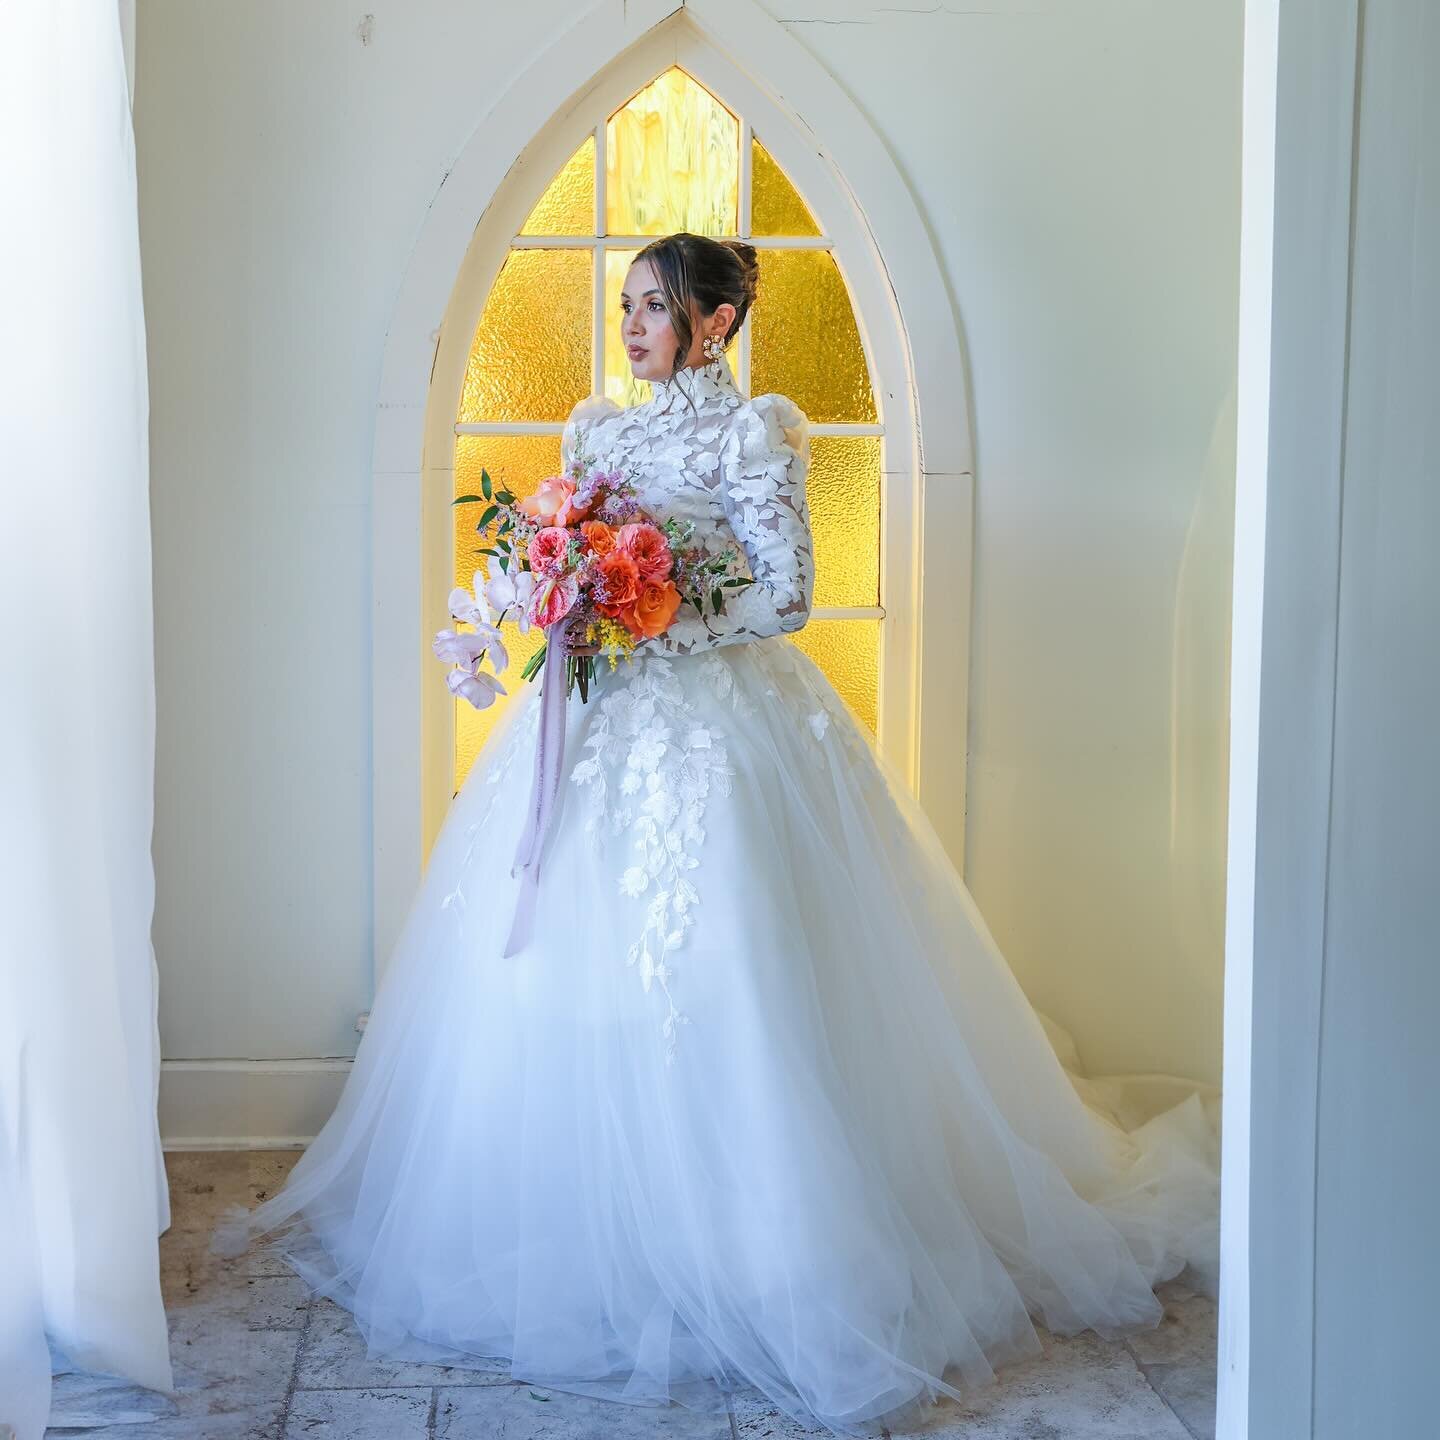 Some more photos from our styled shoot at the Chapel Home in Wimberley for you today!

Vendors
Venue: @chapelhomewimberley 
Florals: @edenpark_floral 
Flower Distributor: @austinflowerco 
Wedding Gowns: @pronovias 
Bridesmaids Dresses: @eddy_aestheti